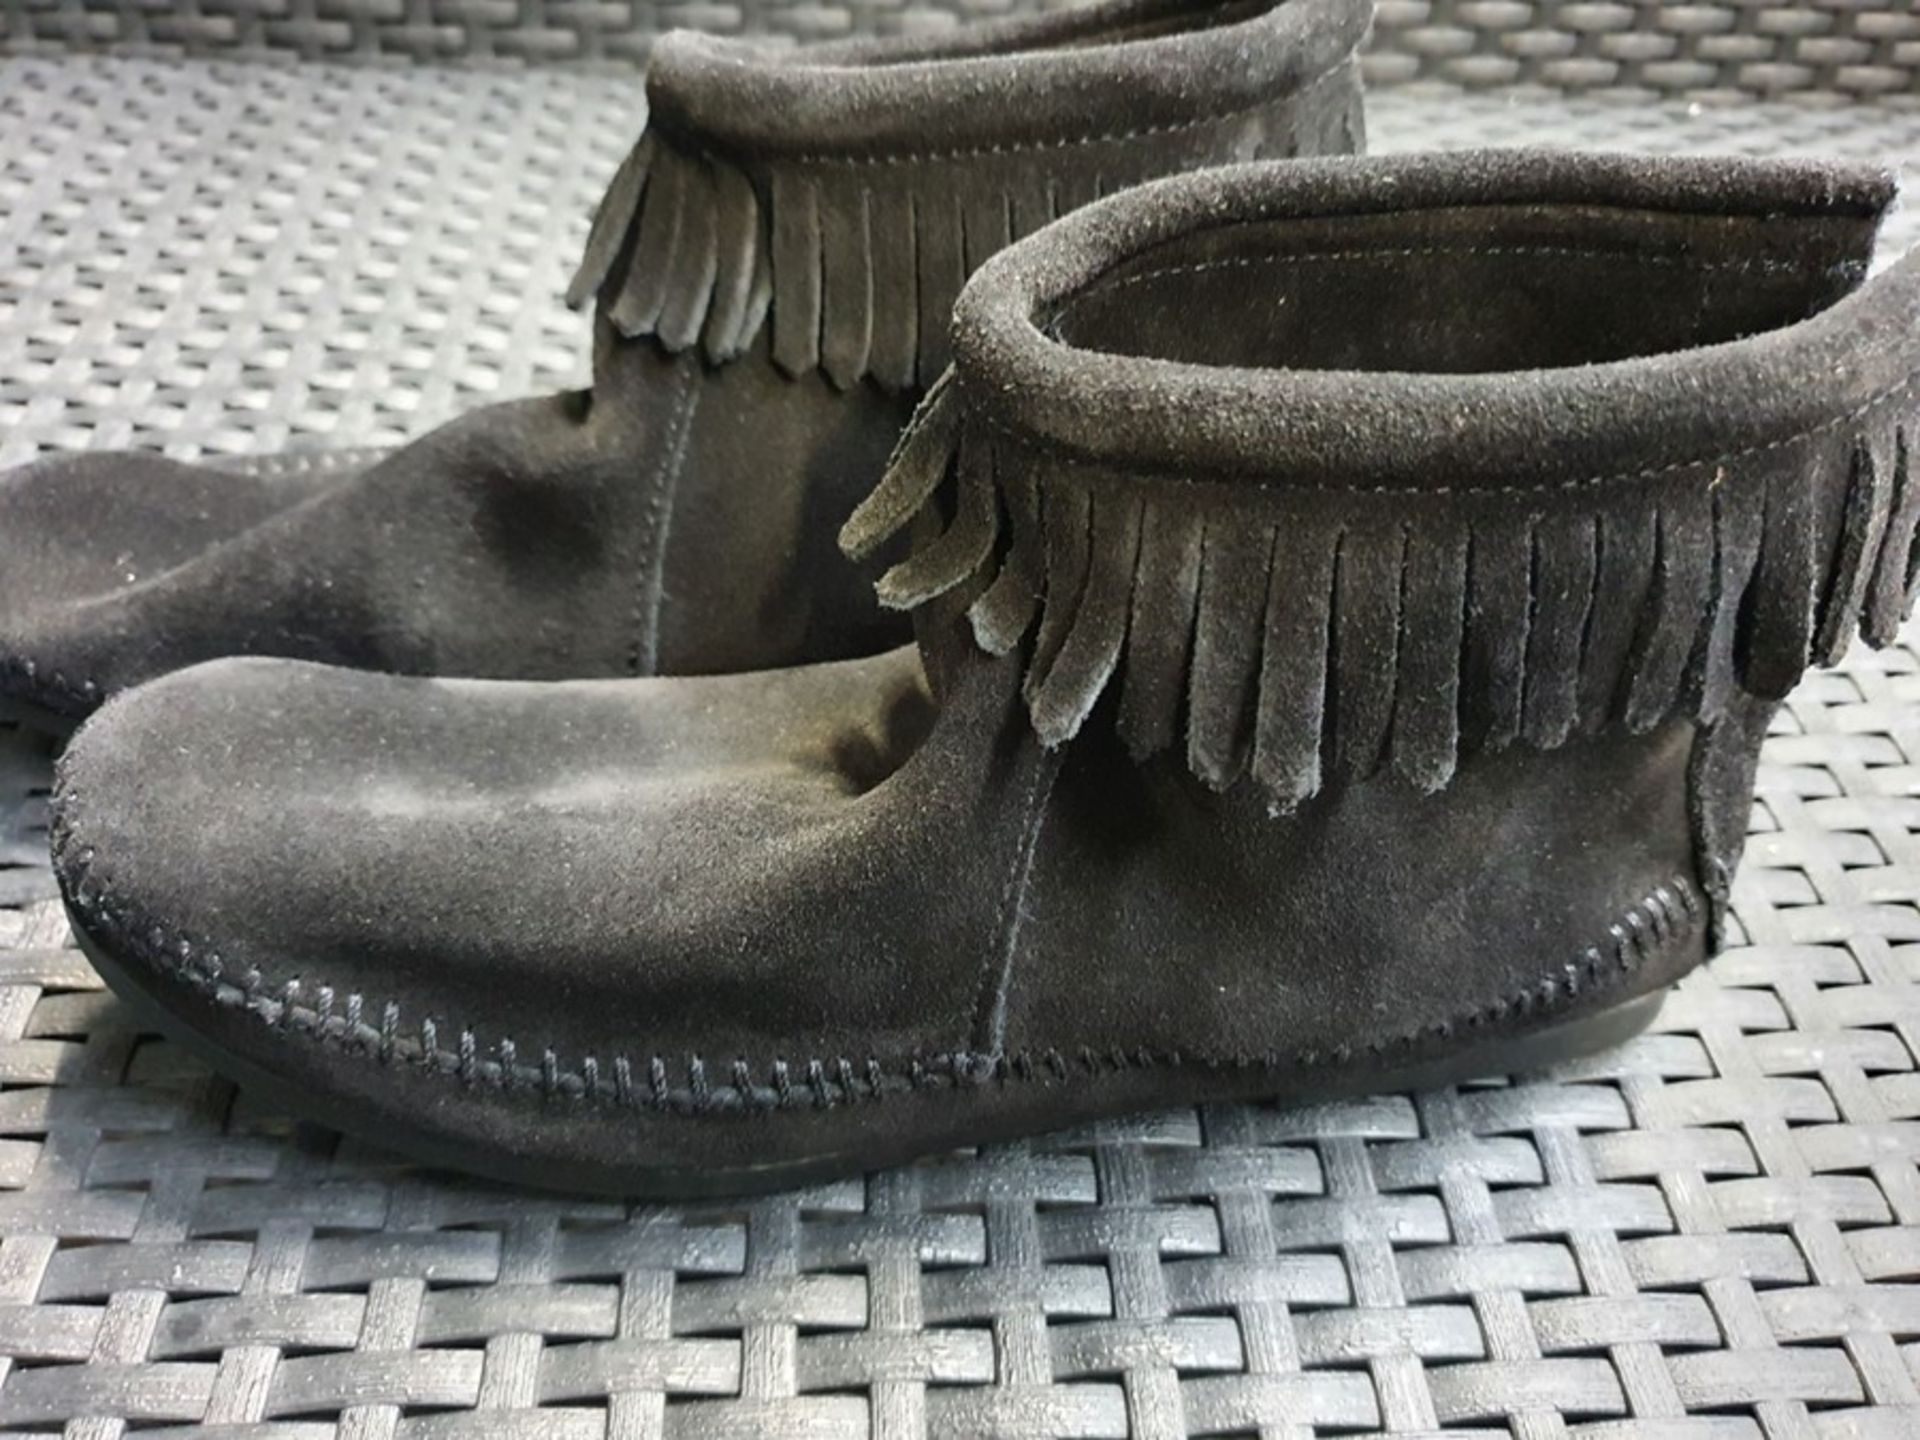 ONE PAIR OF MINNETONKA SUEDE FRINGED ANKLE BOOTS IN BLACK - SIZE UNKNOWN APPROX UK 5. RRP £75.00 - Image 2 of 2